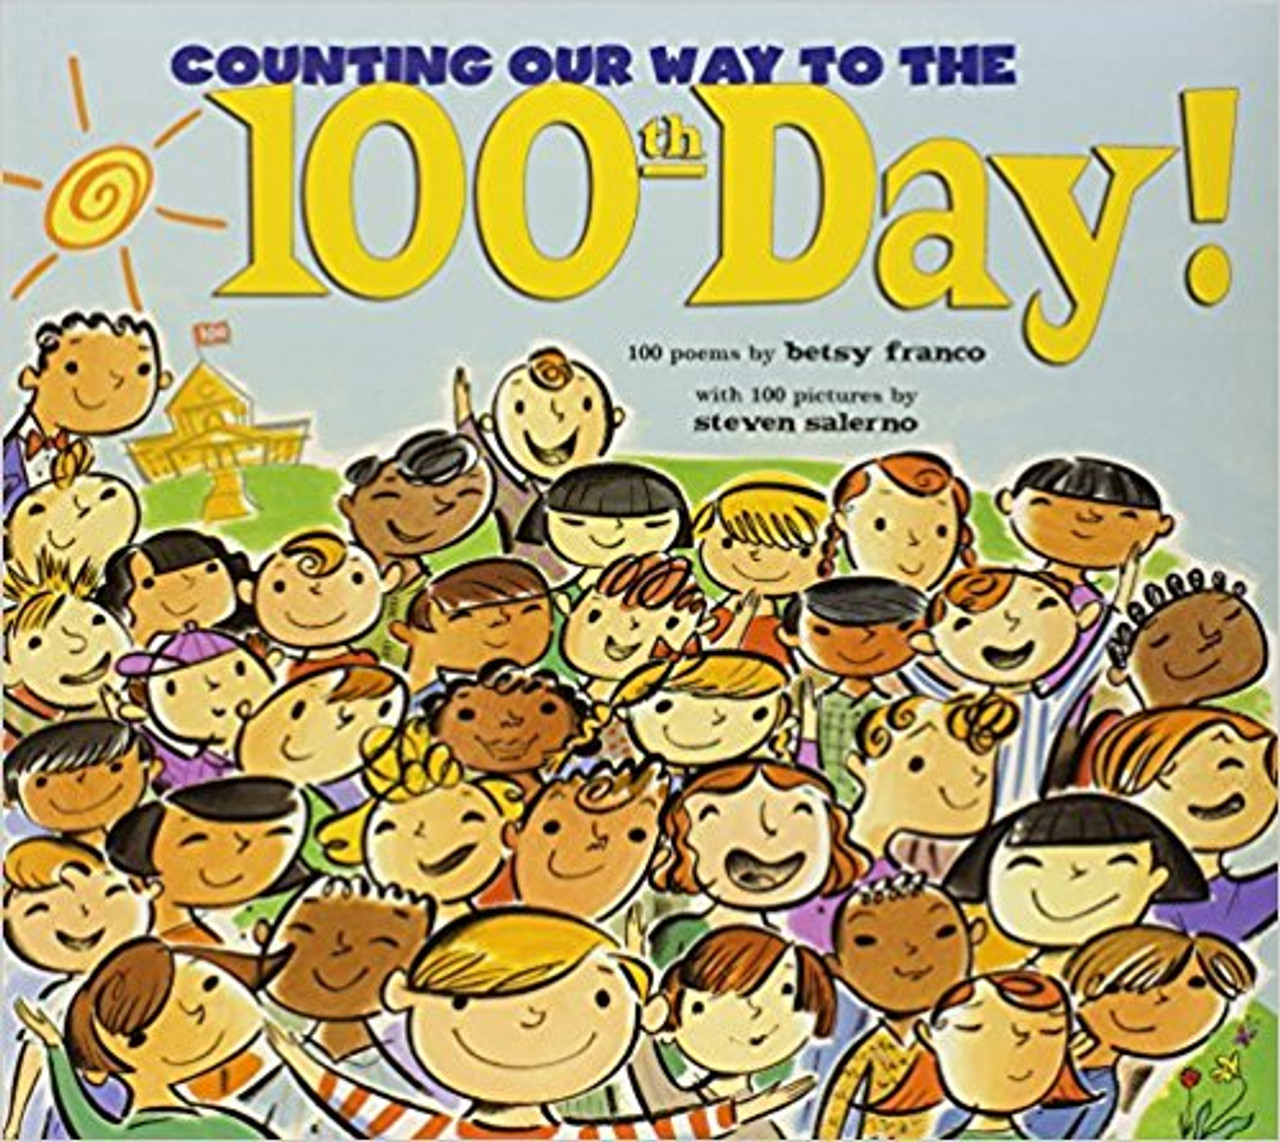 The 100th day of school is an exciting milestone that is celebrated in schools around the world. Here, Franco presents a fun, unique collection of poems that all explore some aspect of the number 100, complemented by bright, vibrant artwork. Full color.